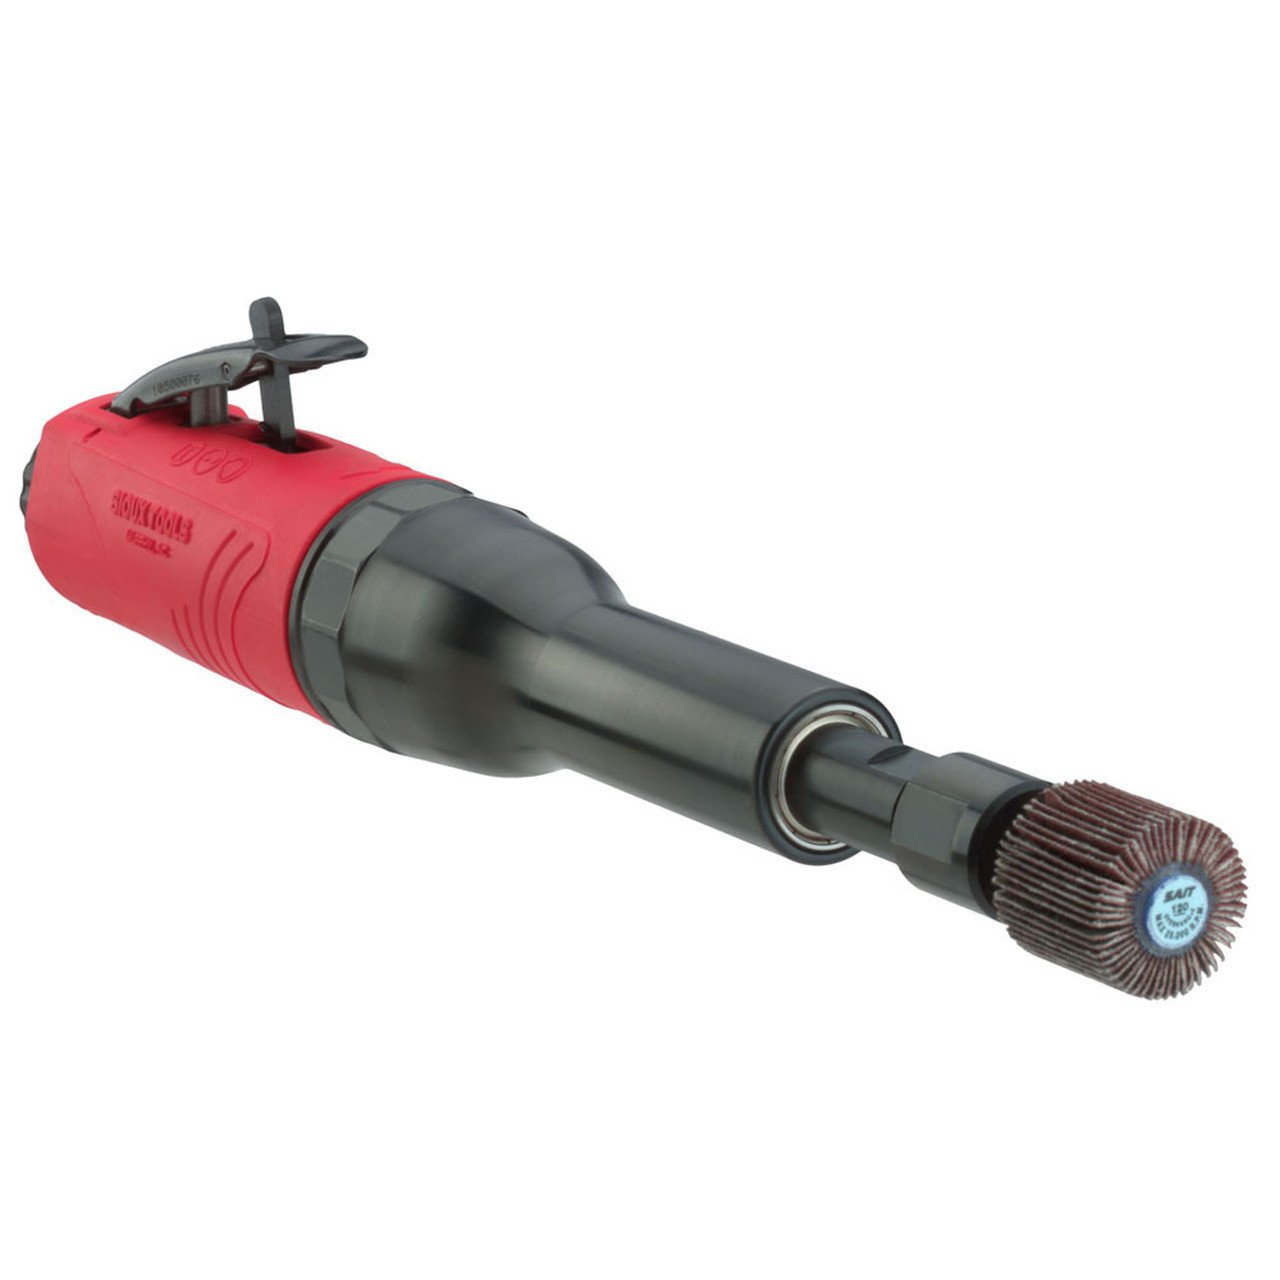 Sioux Tools SXG05S23 Extended Die Grinder | 0.5 HP | 23000 RPM | Rear Exhaust | 1/4" Collet